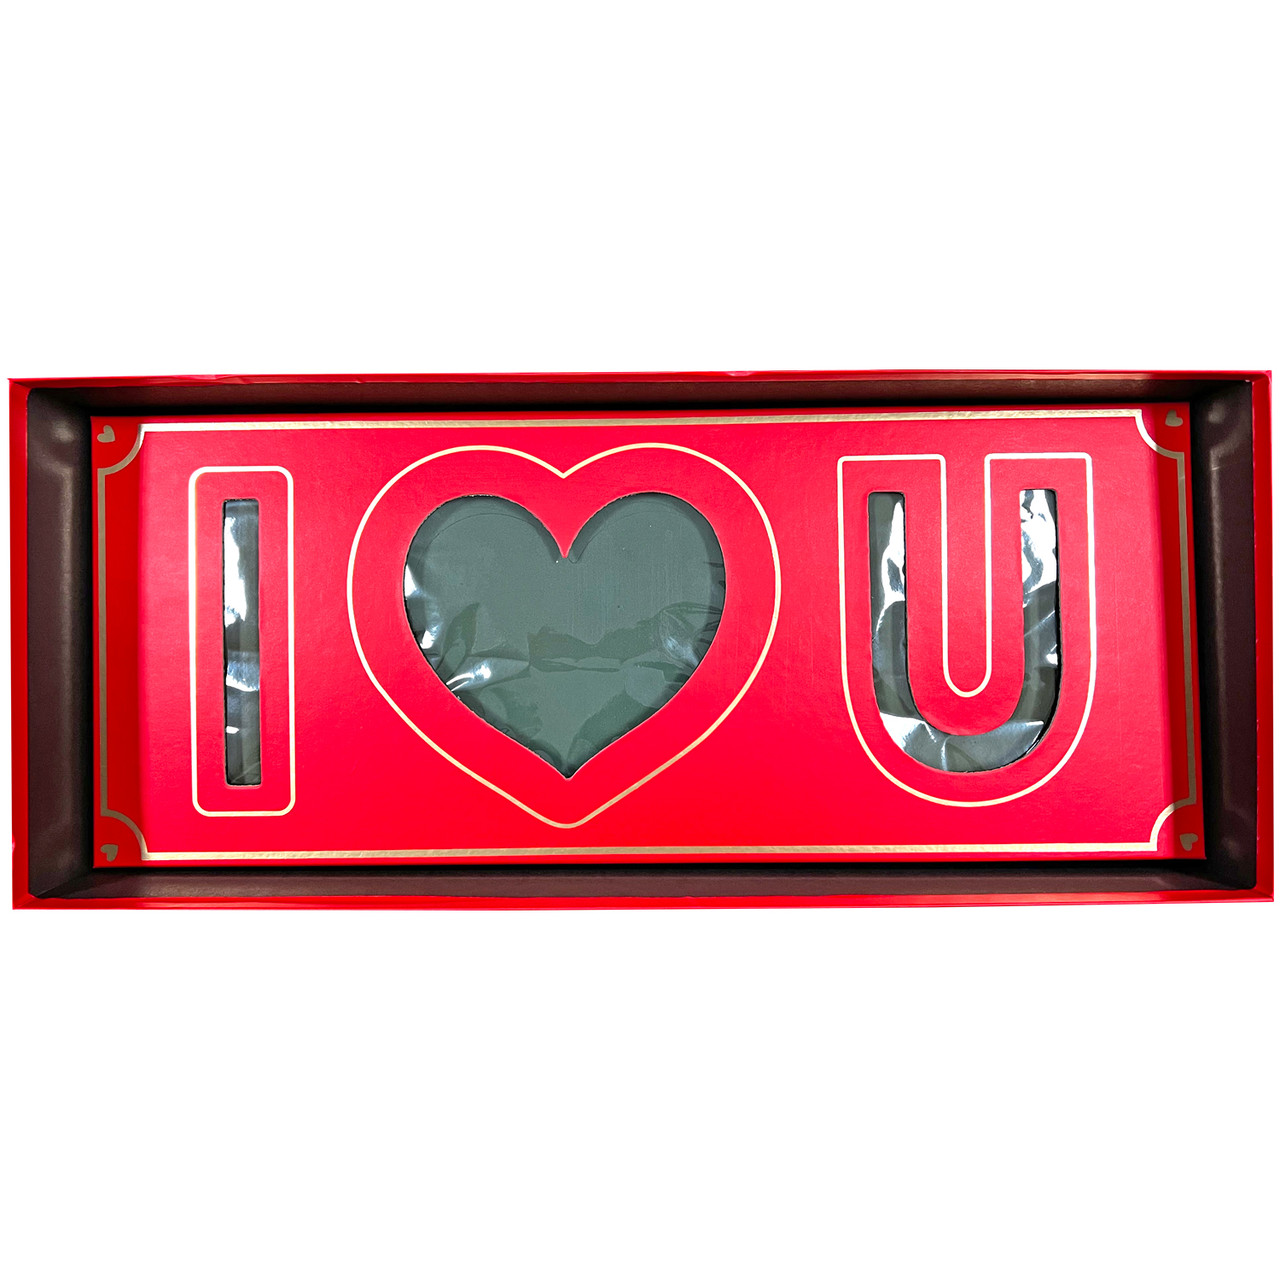 I Love You Box - with Floral Foam and Plastic Liner | Various Colors